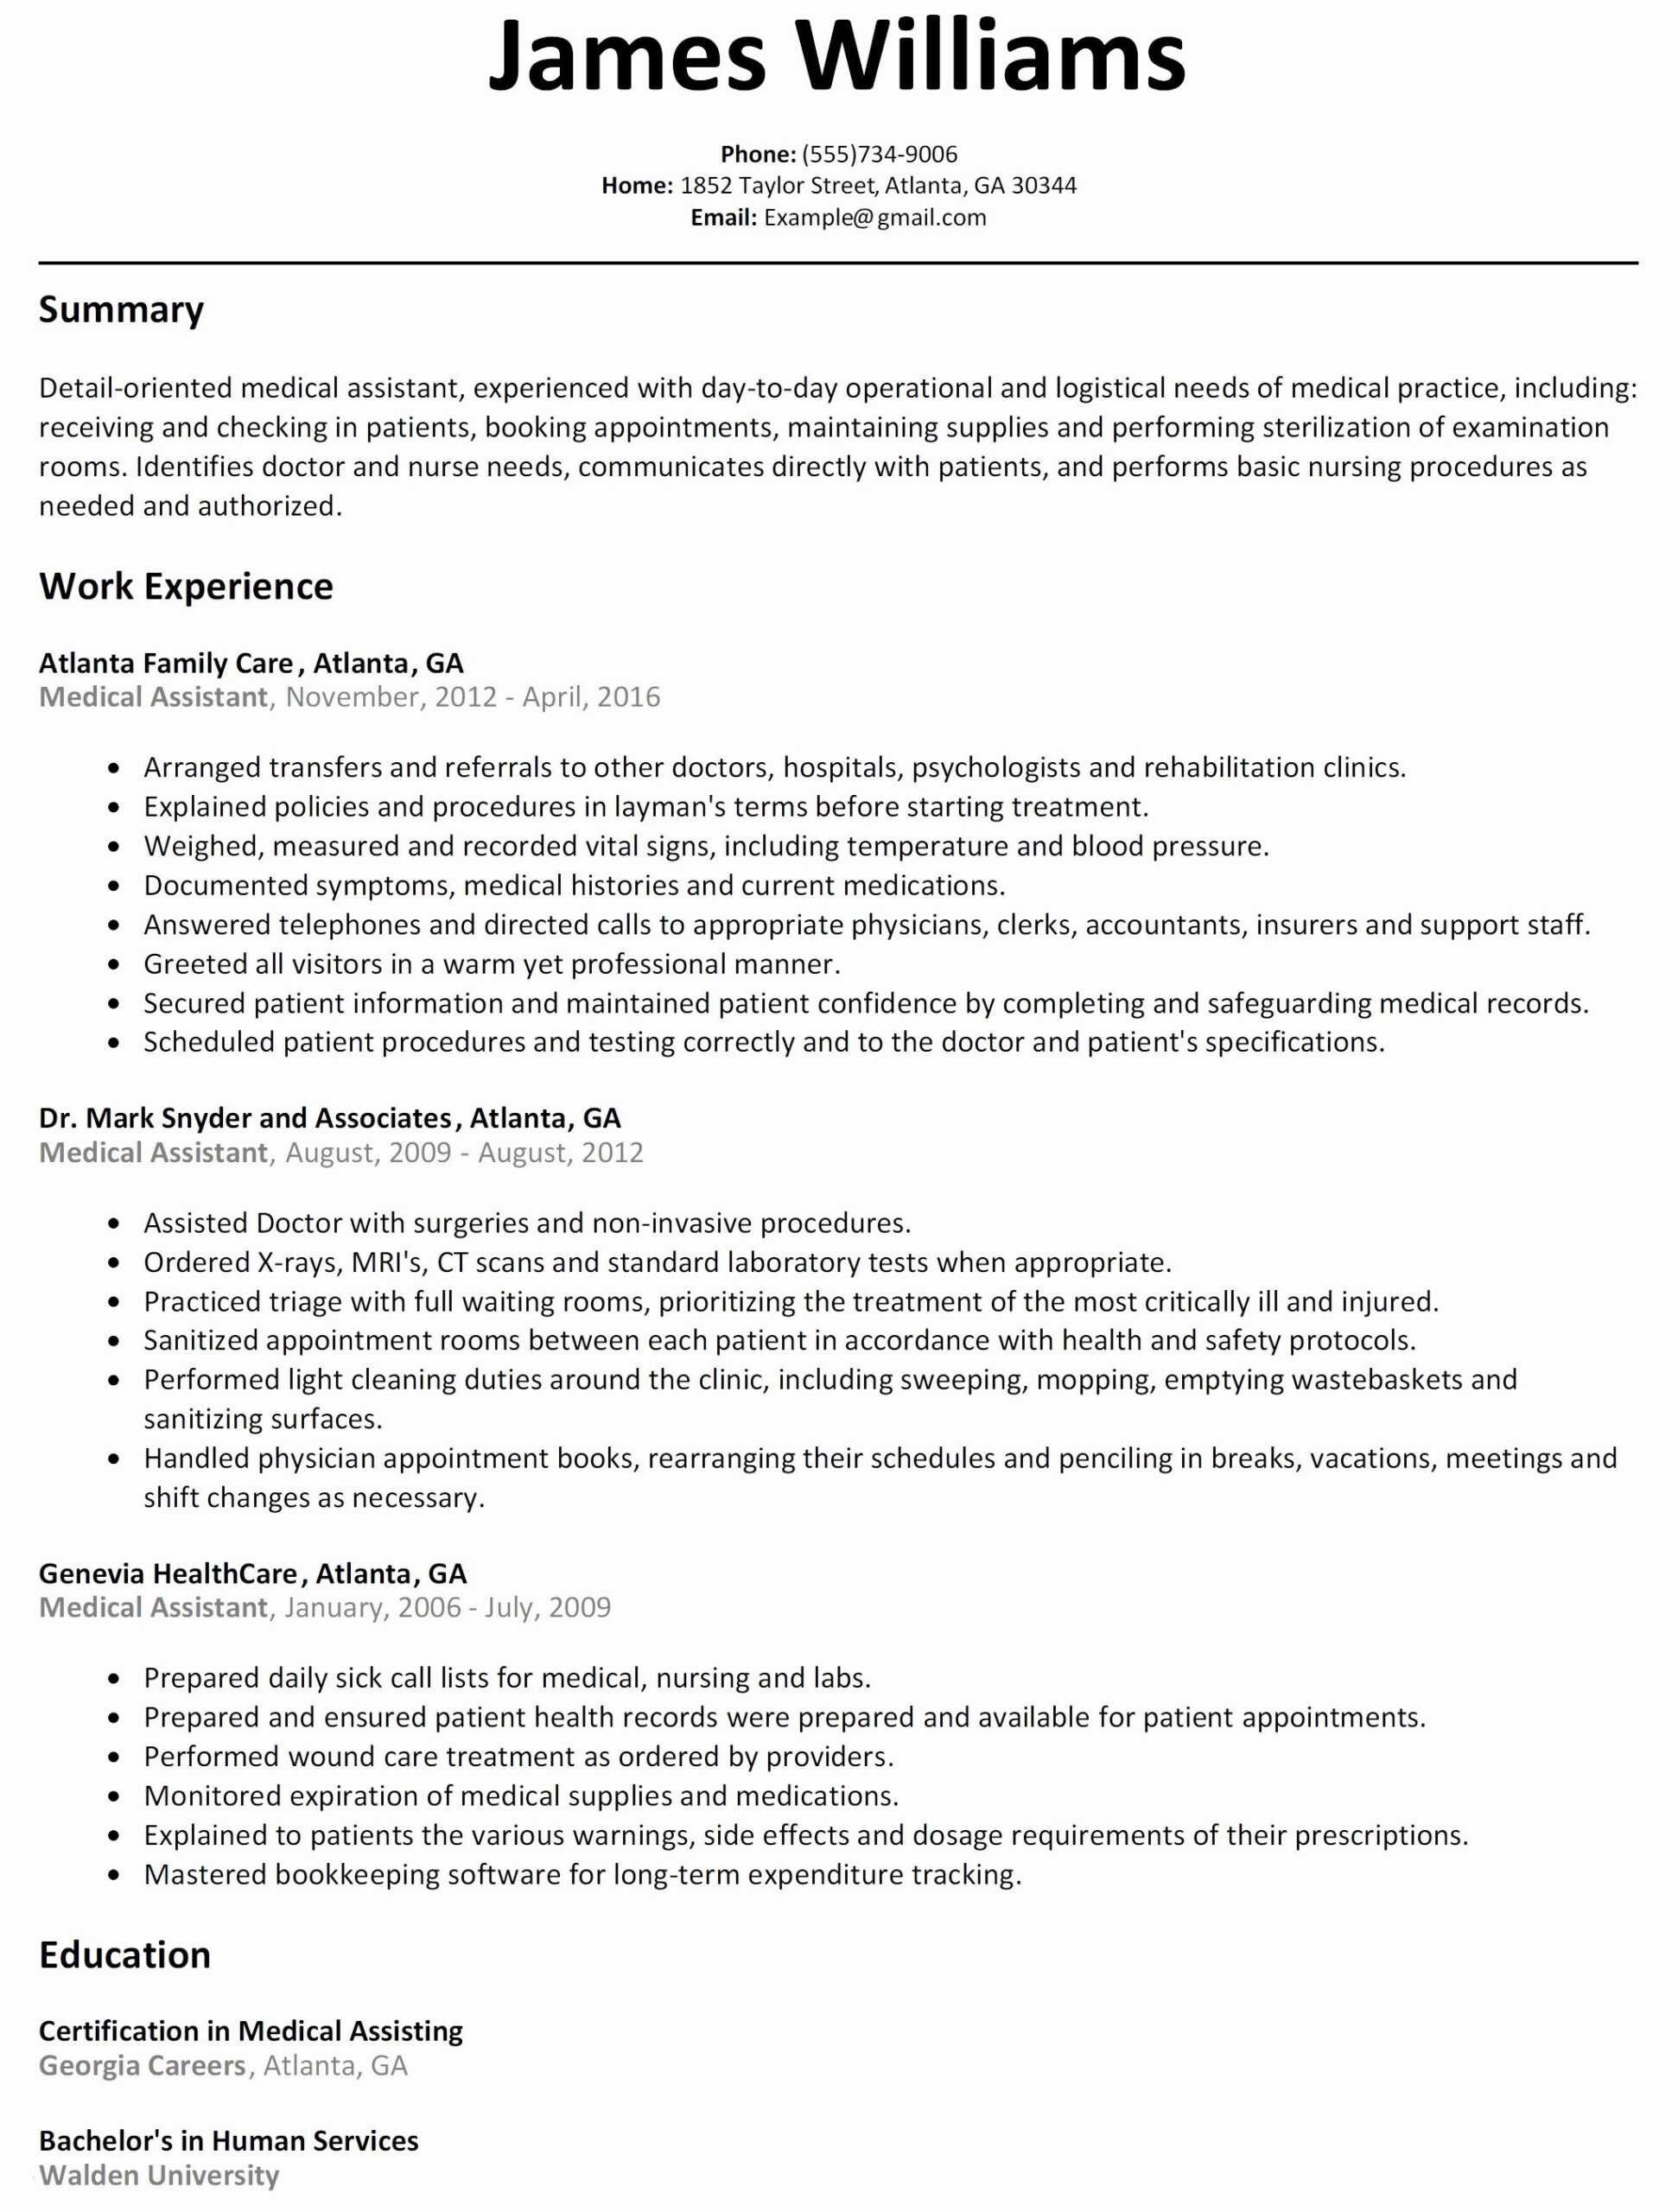 Blank Resume Templates For Microsoft Word – Atlantaauctionco Pertaining To Blank Resume Templates For Microsoft Word